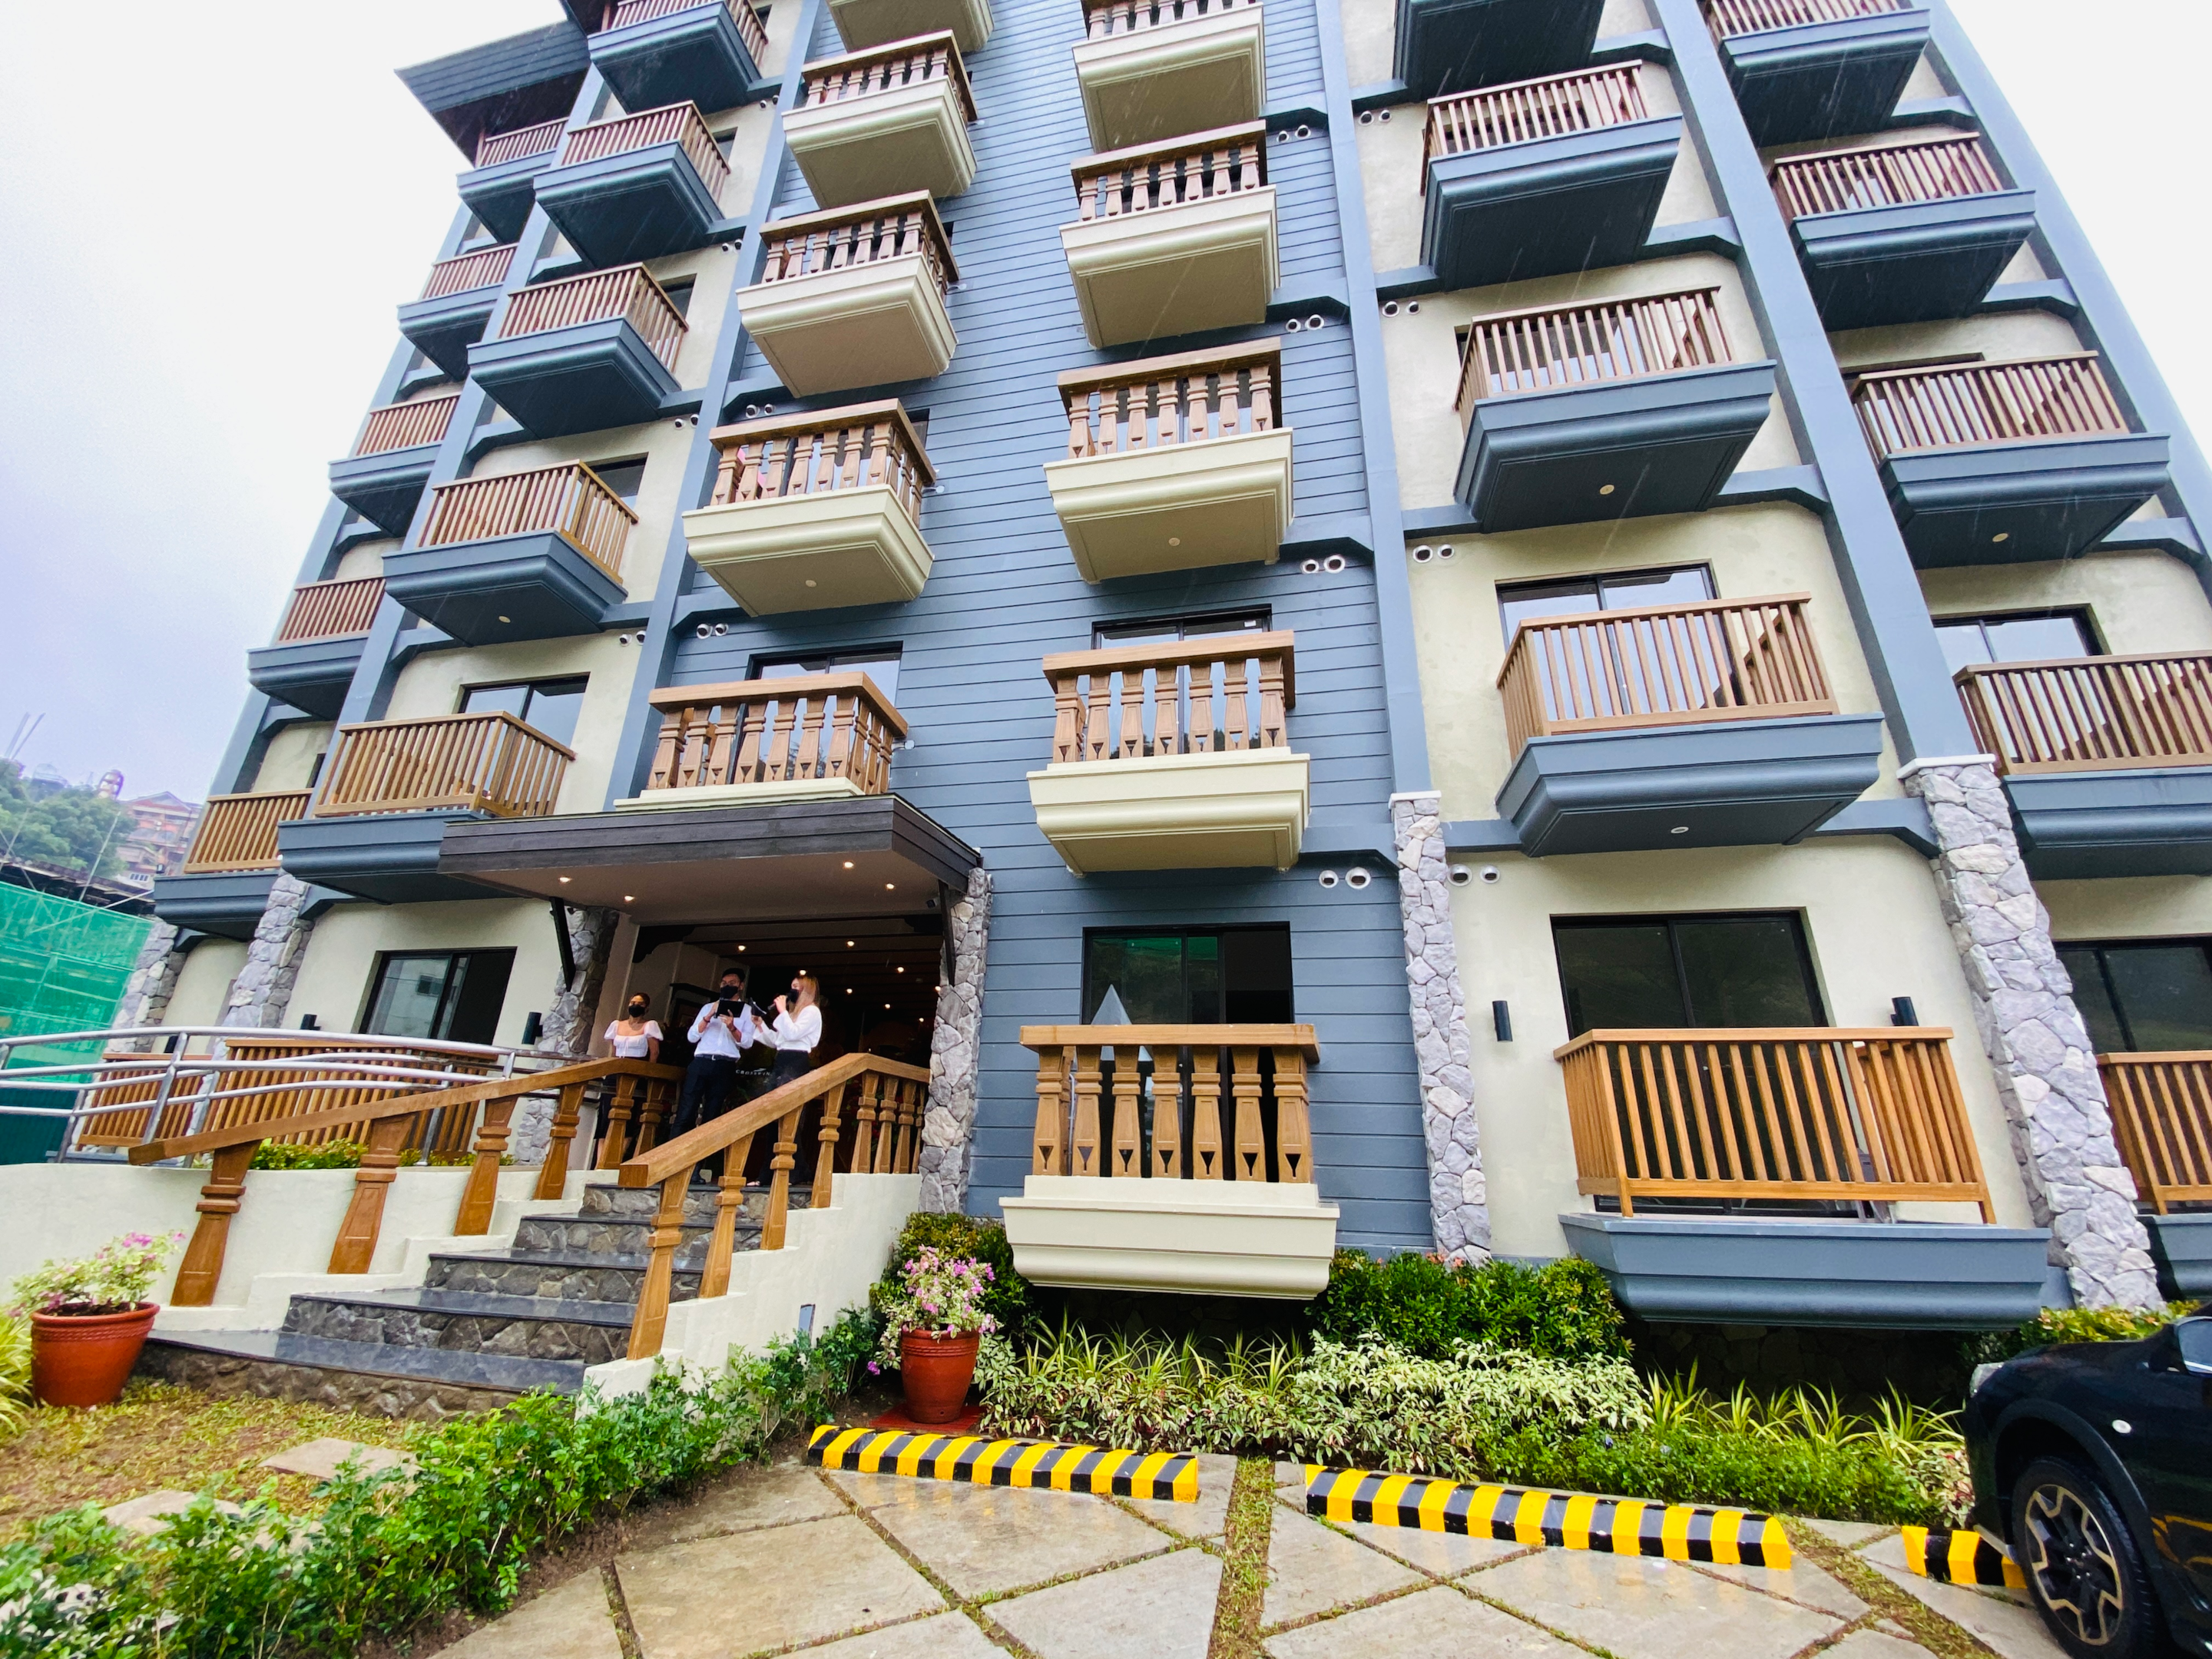 Mid-rise consominiums like Alpine Villas create more exclusive luxury spaces.